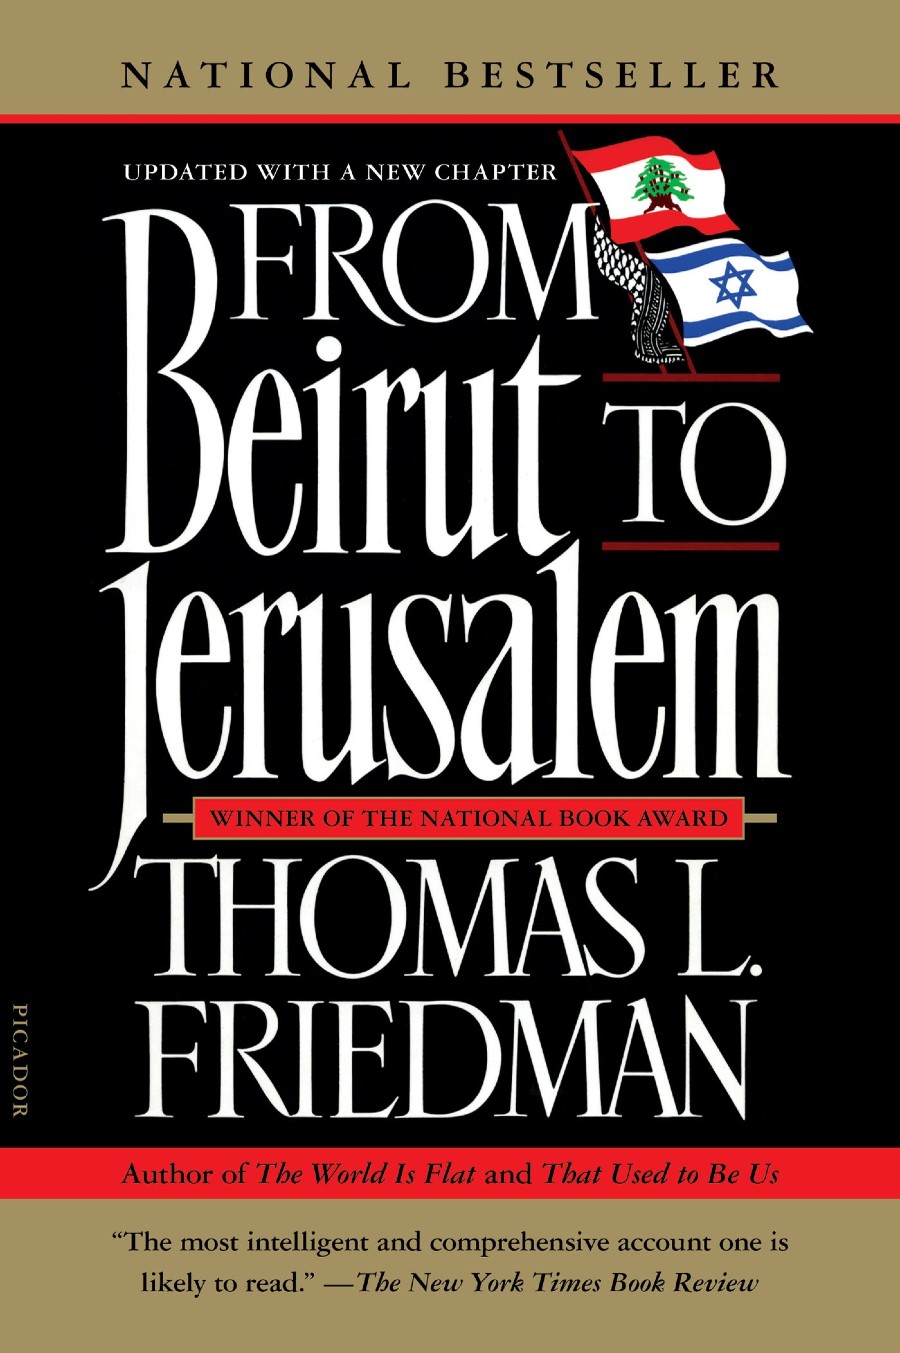 from beirut to jerusalem non-fiction book